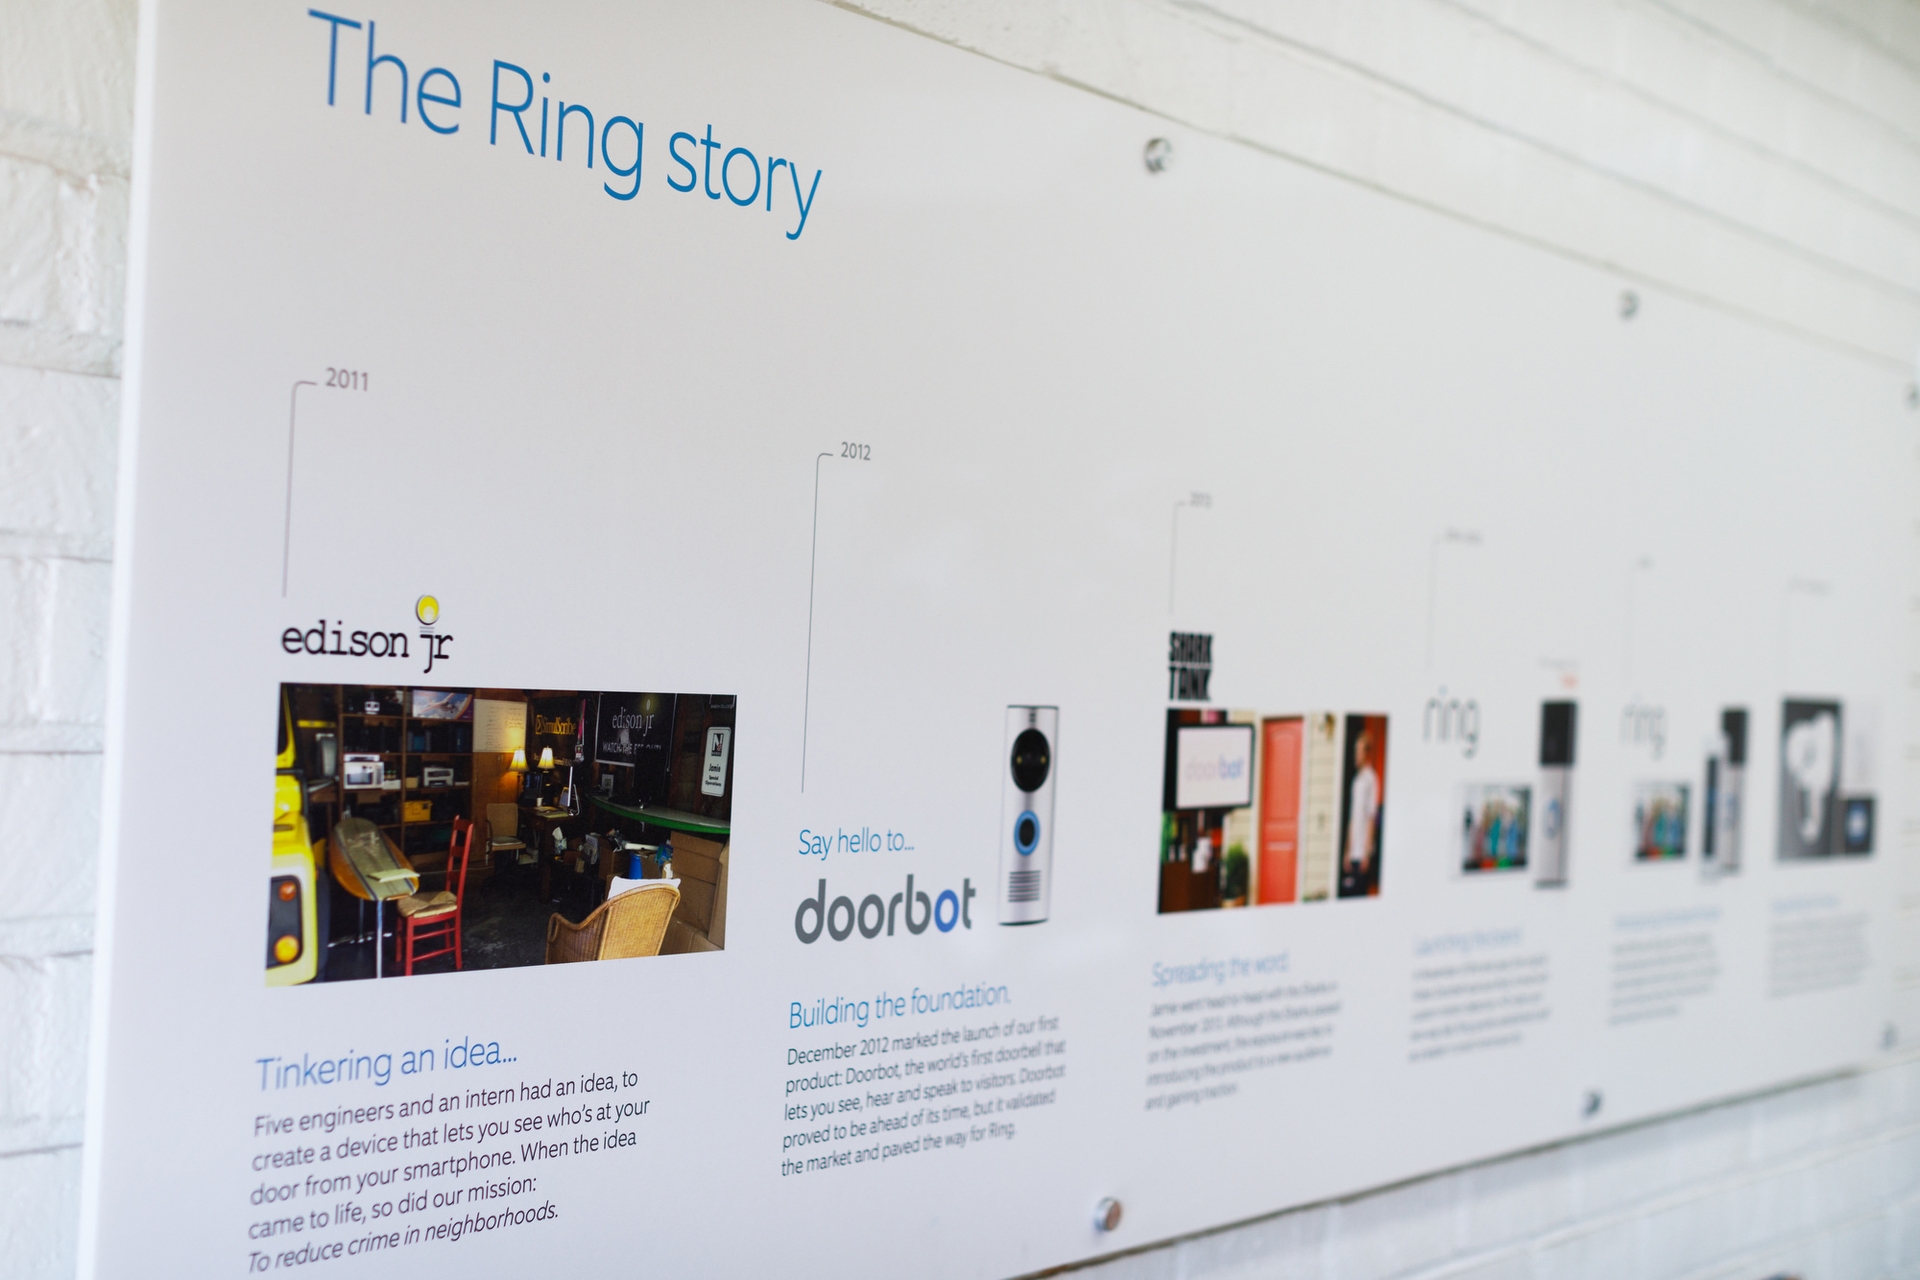 A timeline at Ring headquarters in Santa Monica, CA showing the evolution of the Ring story.